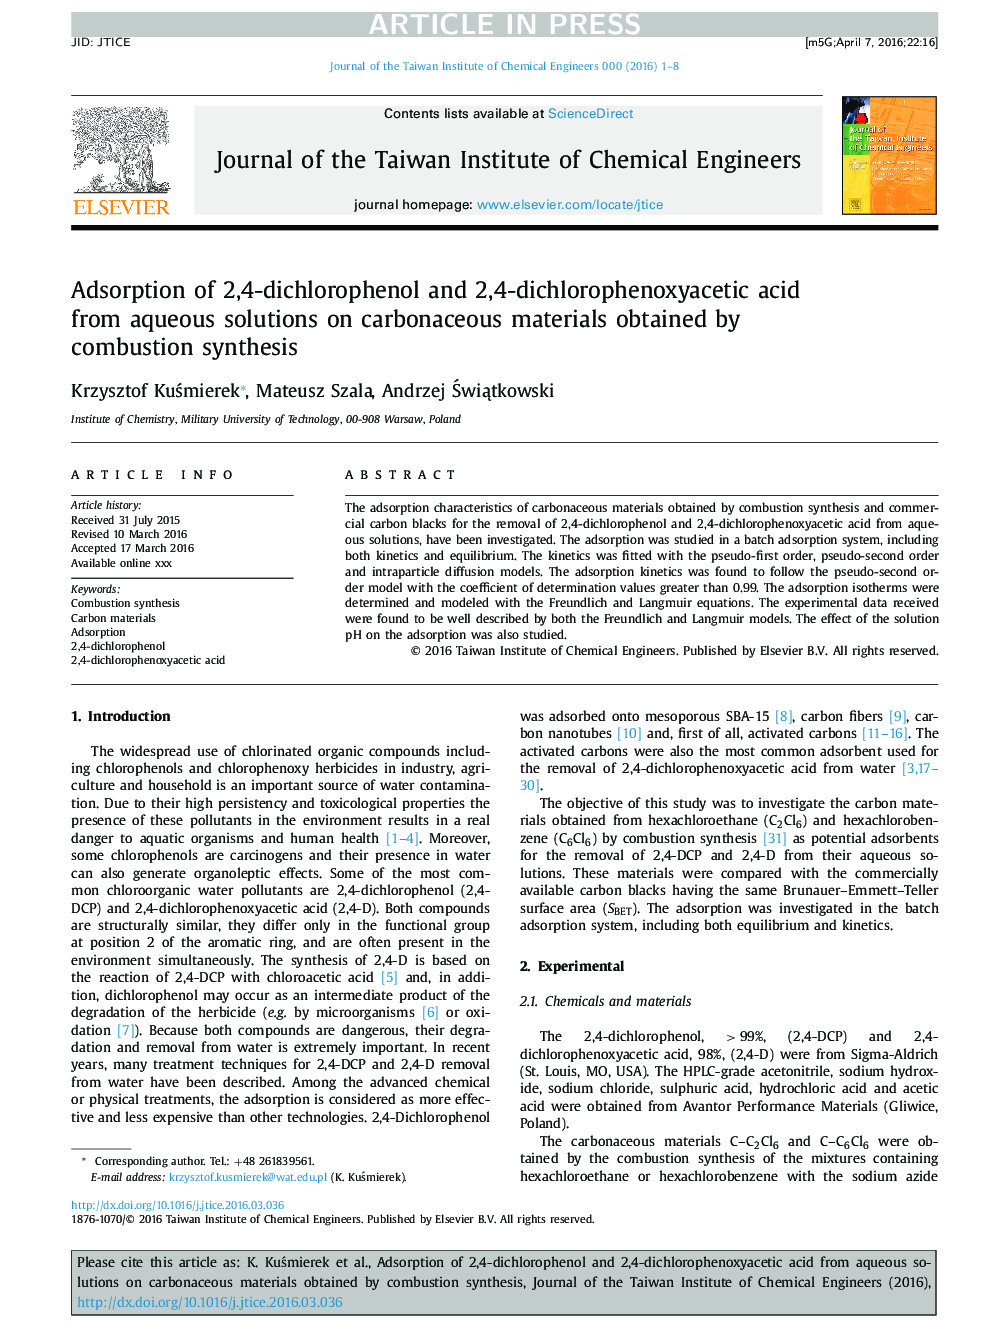 Adsorption of 2,4-dichlorophenol and 2,4-dichlorophenoxyacetic acid from aqueous solutions on carbonaceous materials obtained by combustion synthesis